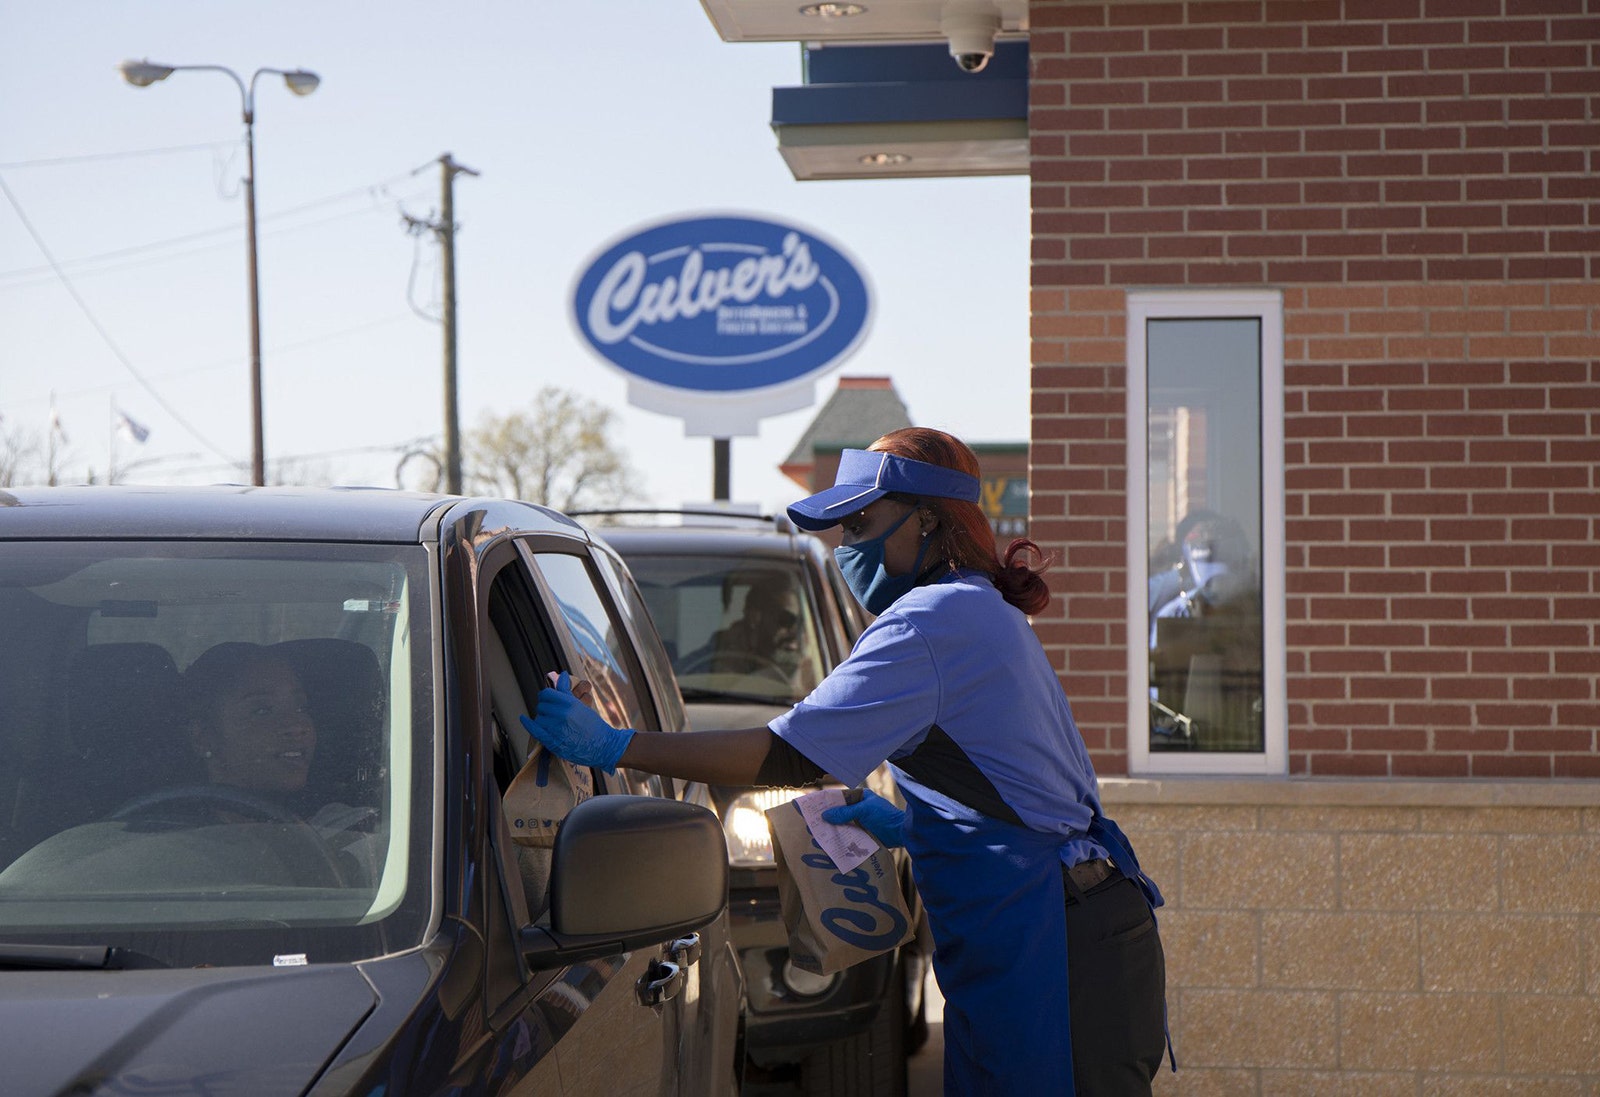 Culver’s restaurants switched from Pepsi to Coca-Cola, upsetting fans